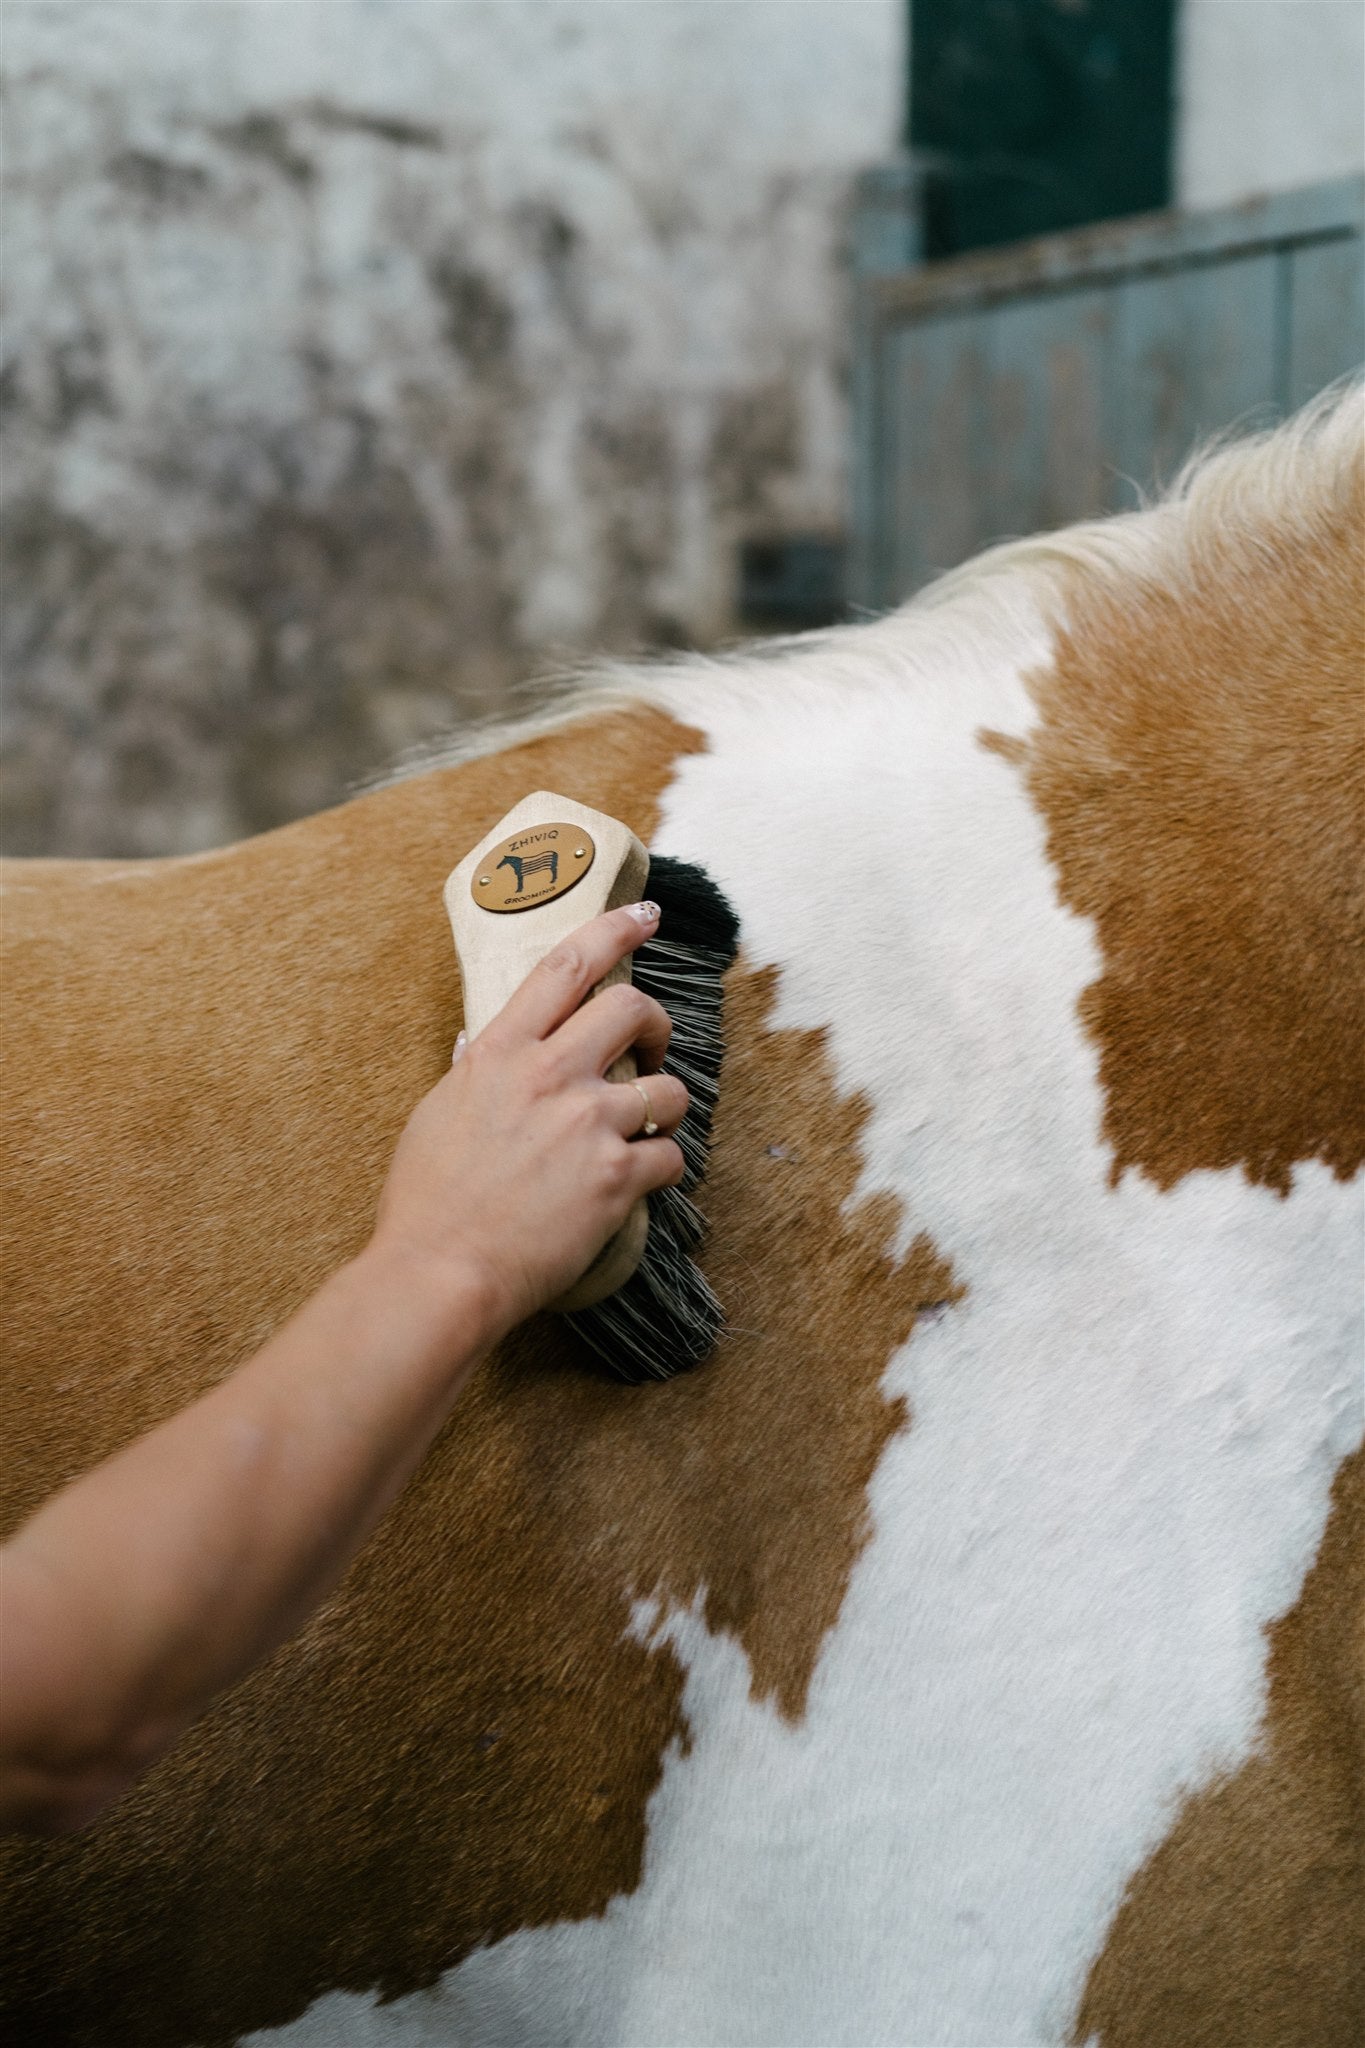 Everything you want to know about the brandZhiviq Shaped Soft Flick - Horse Brush - Suitable for removing superficial dirt